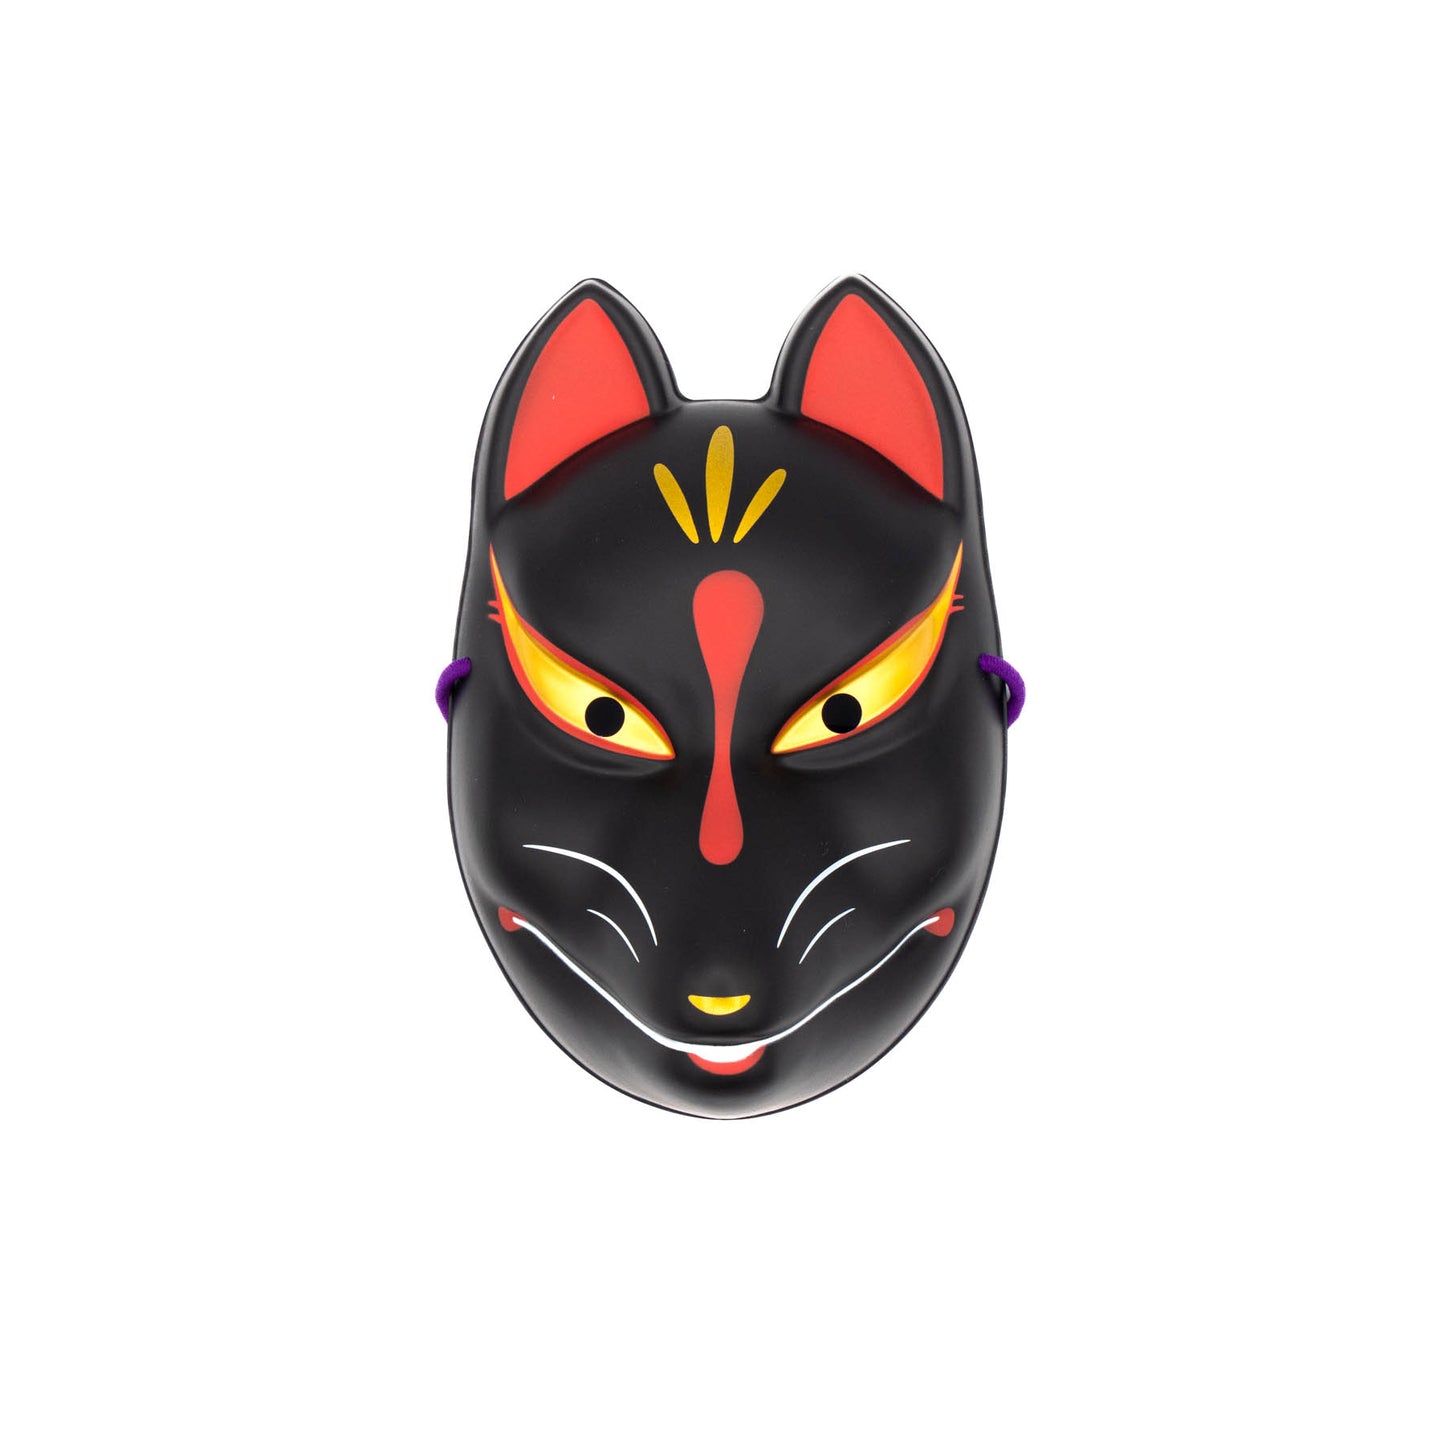 Japanese Fox Mask - Red and Black